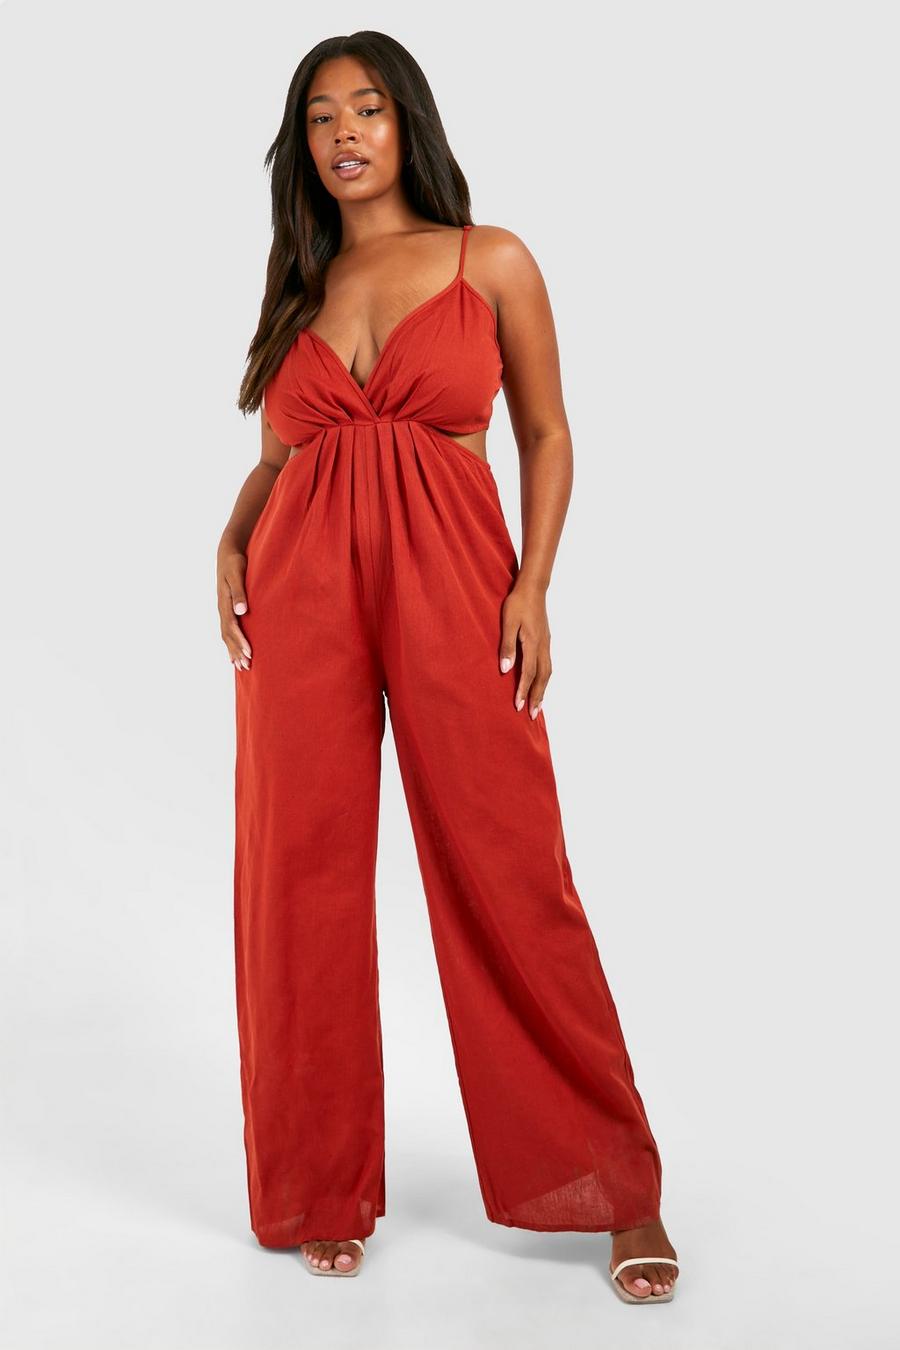 Red Plus Woven Twist Front Strappy Jumpsuit